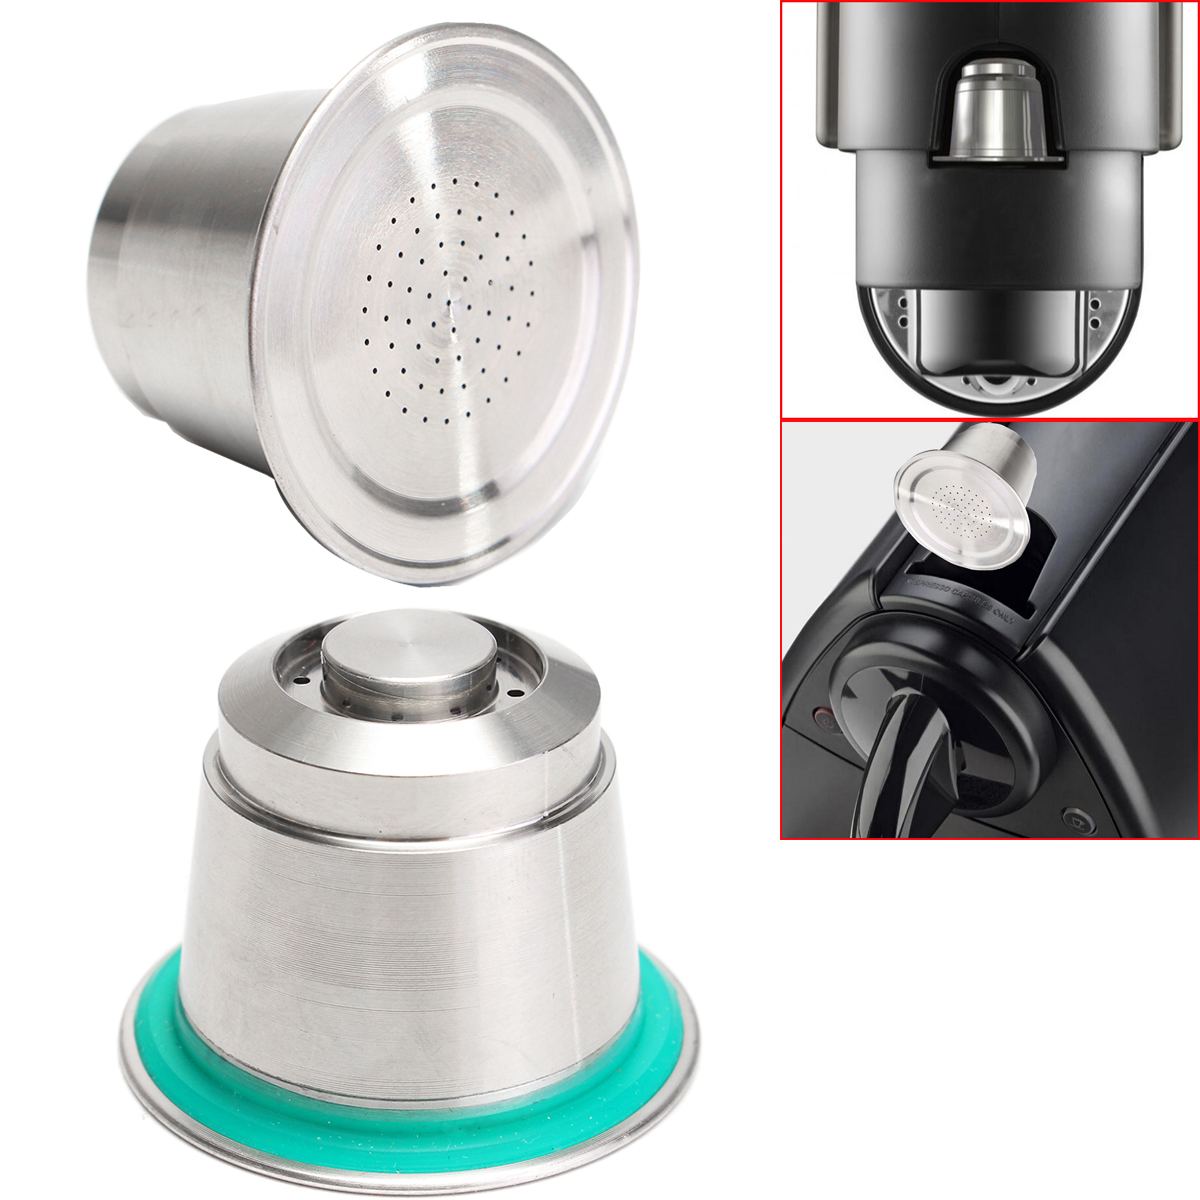 Fine-Grind-Coffee-Capsule-Cup-Stainless-Steel-Reusable-Refillable-For-Nespresso-1268152